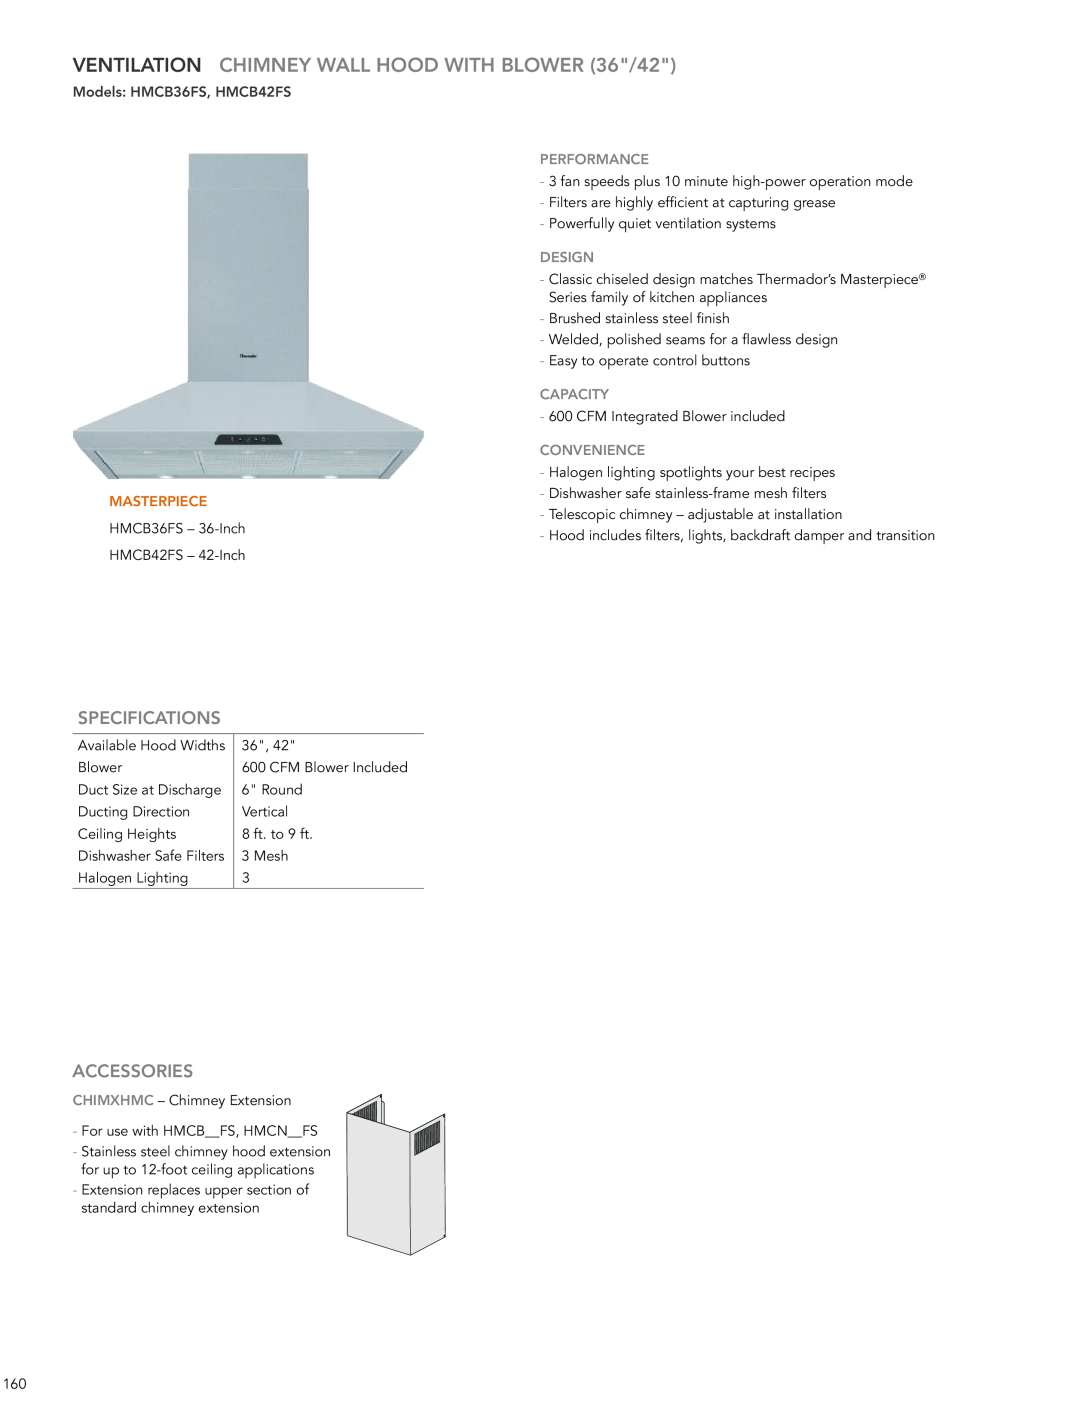 Thermador HMWB36FS VENTILATION CHIMNEY WALL HOOD WITH BLOWER 36/42, Models HMCB36FS, HMCB42FS, Specifications, Accessories 